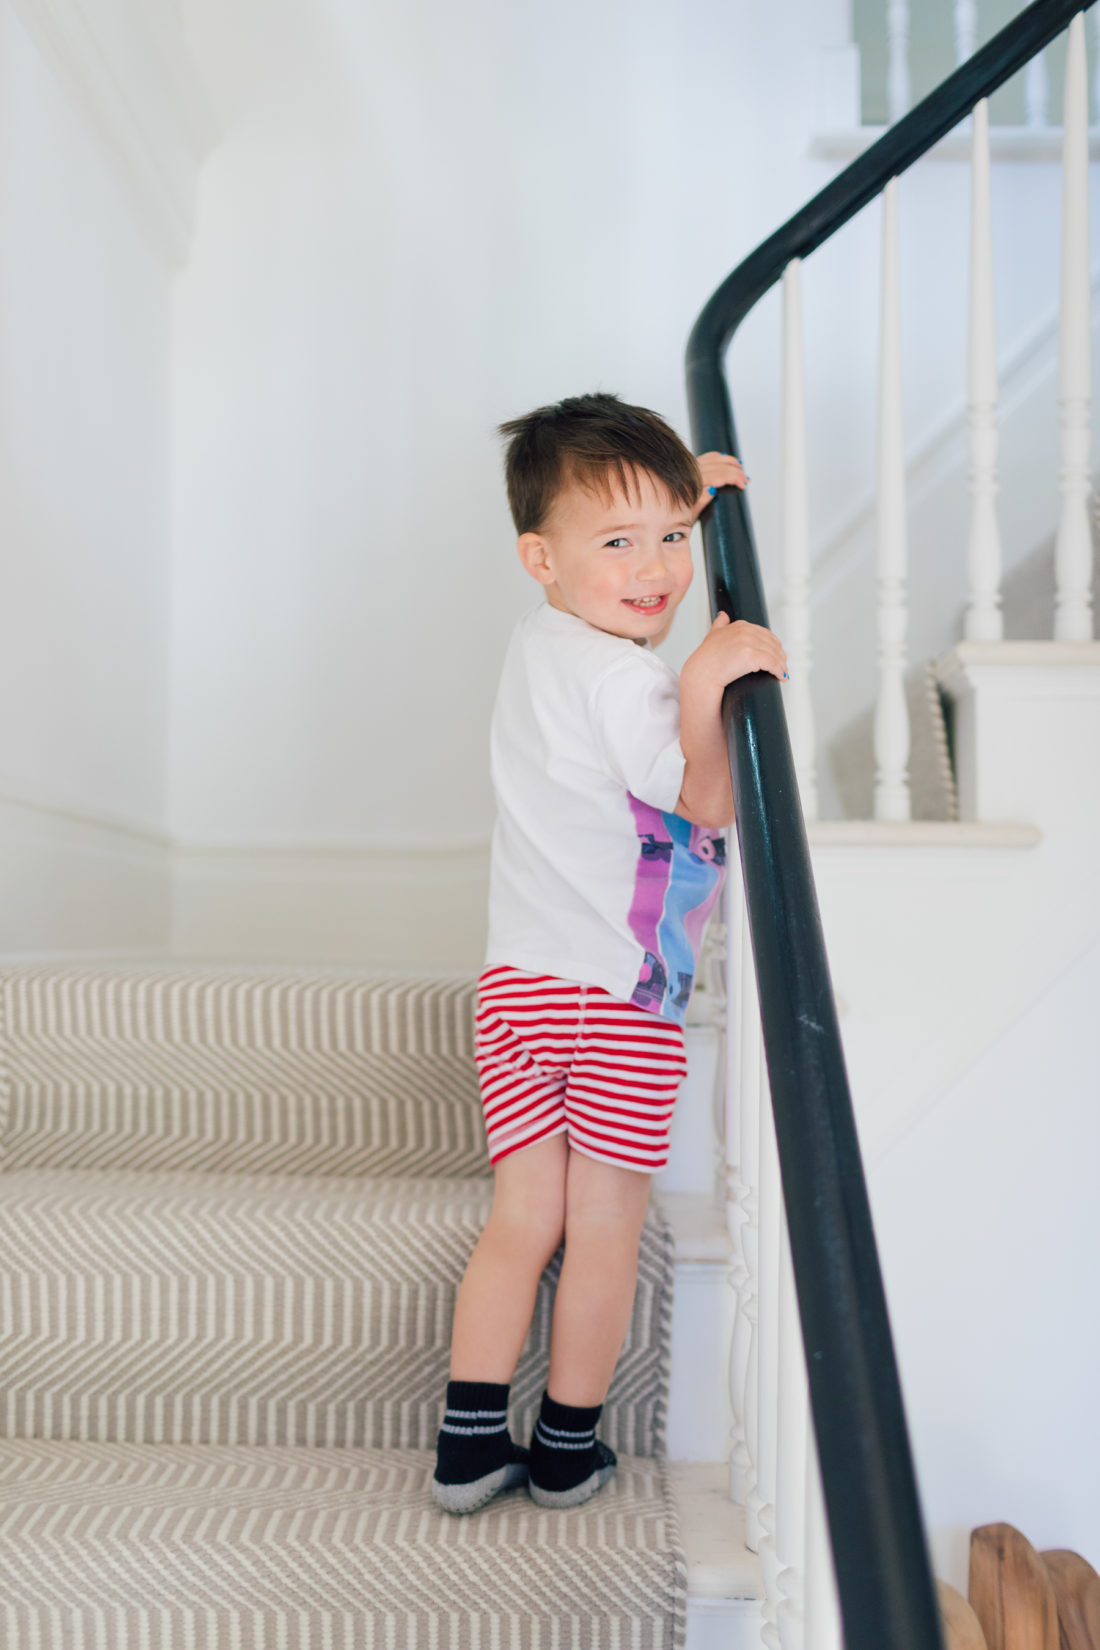 Major Martino turns to walk up the staircase in his connecticut home, wearing the big boy underwear he received at the start of potty training